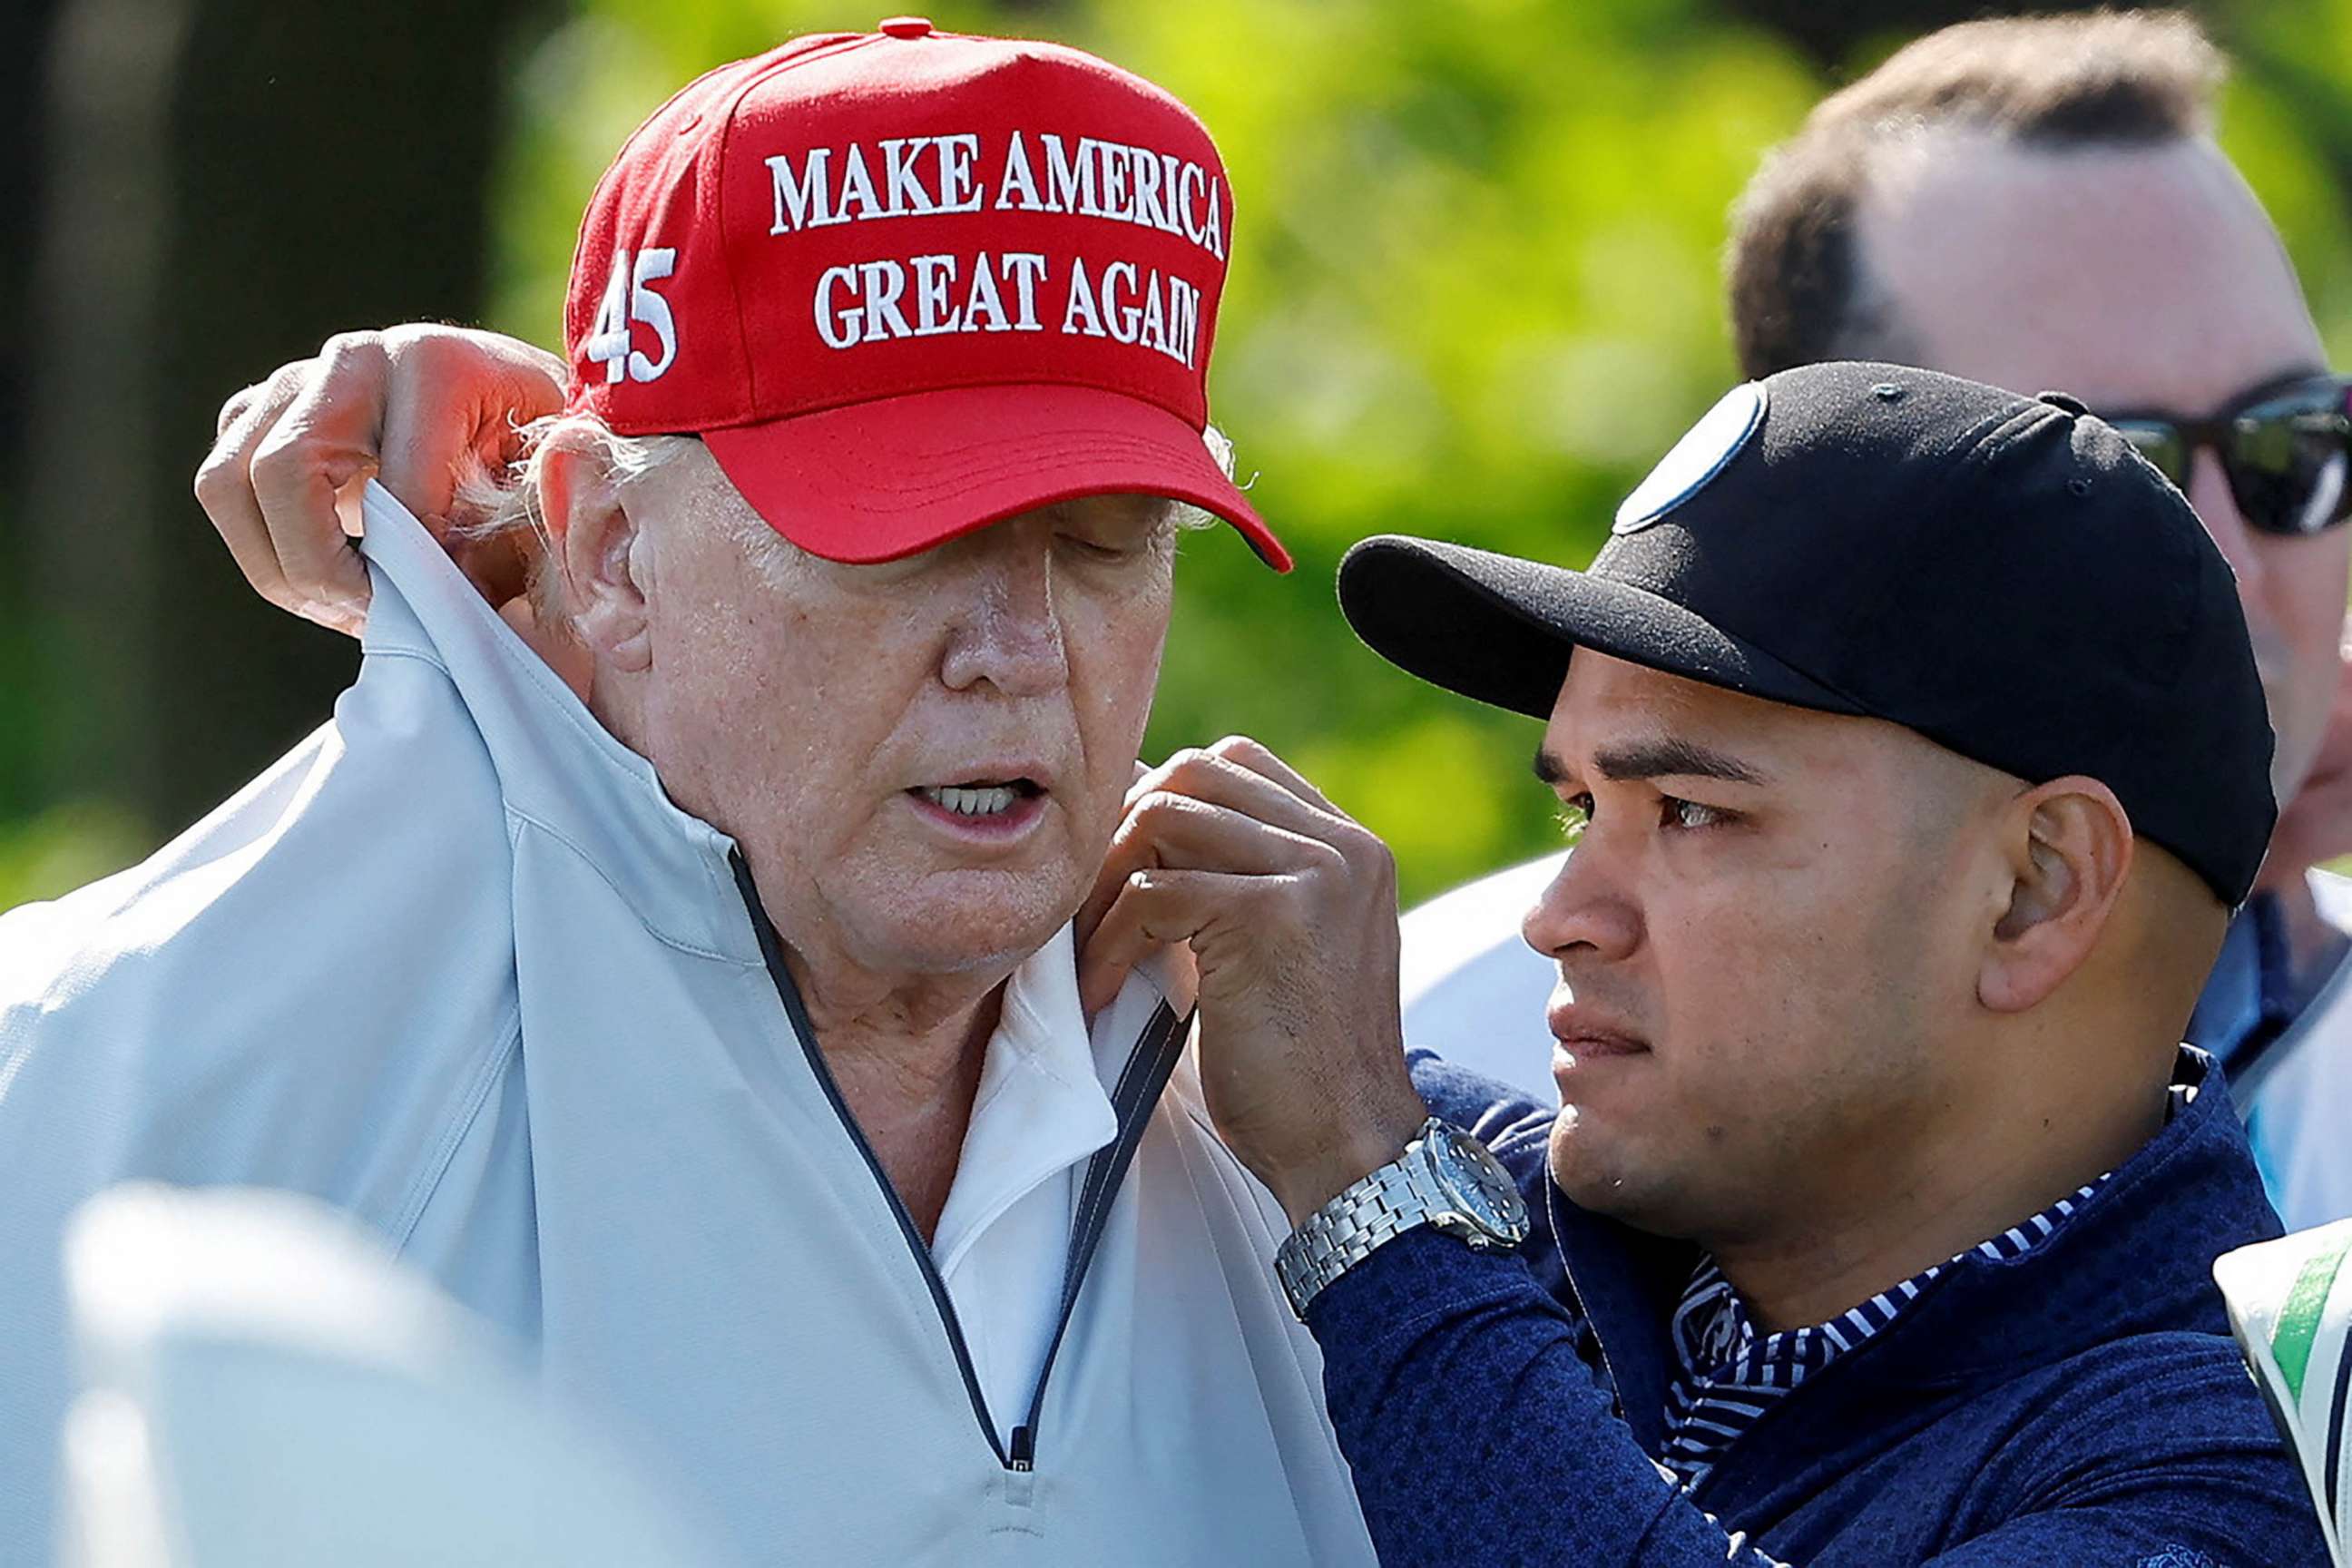 PHOTO: FILE - Walt Nauta, personal aide to former U.S. President Donald Trump who faces charges of being Trump's co-conspirator in the alleged mishandling of classified documents, fixes Trump's collar before a LIV Golf Pro-Am golf tournament